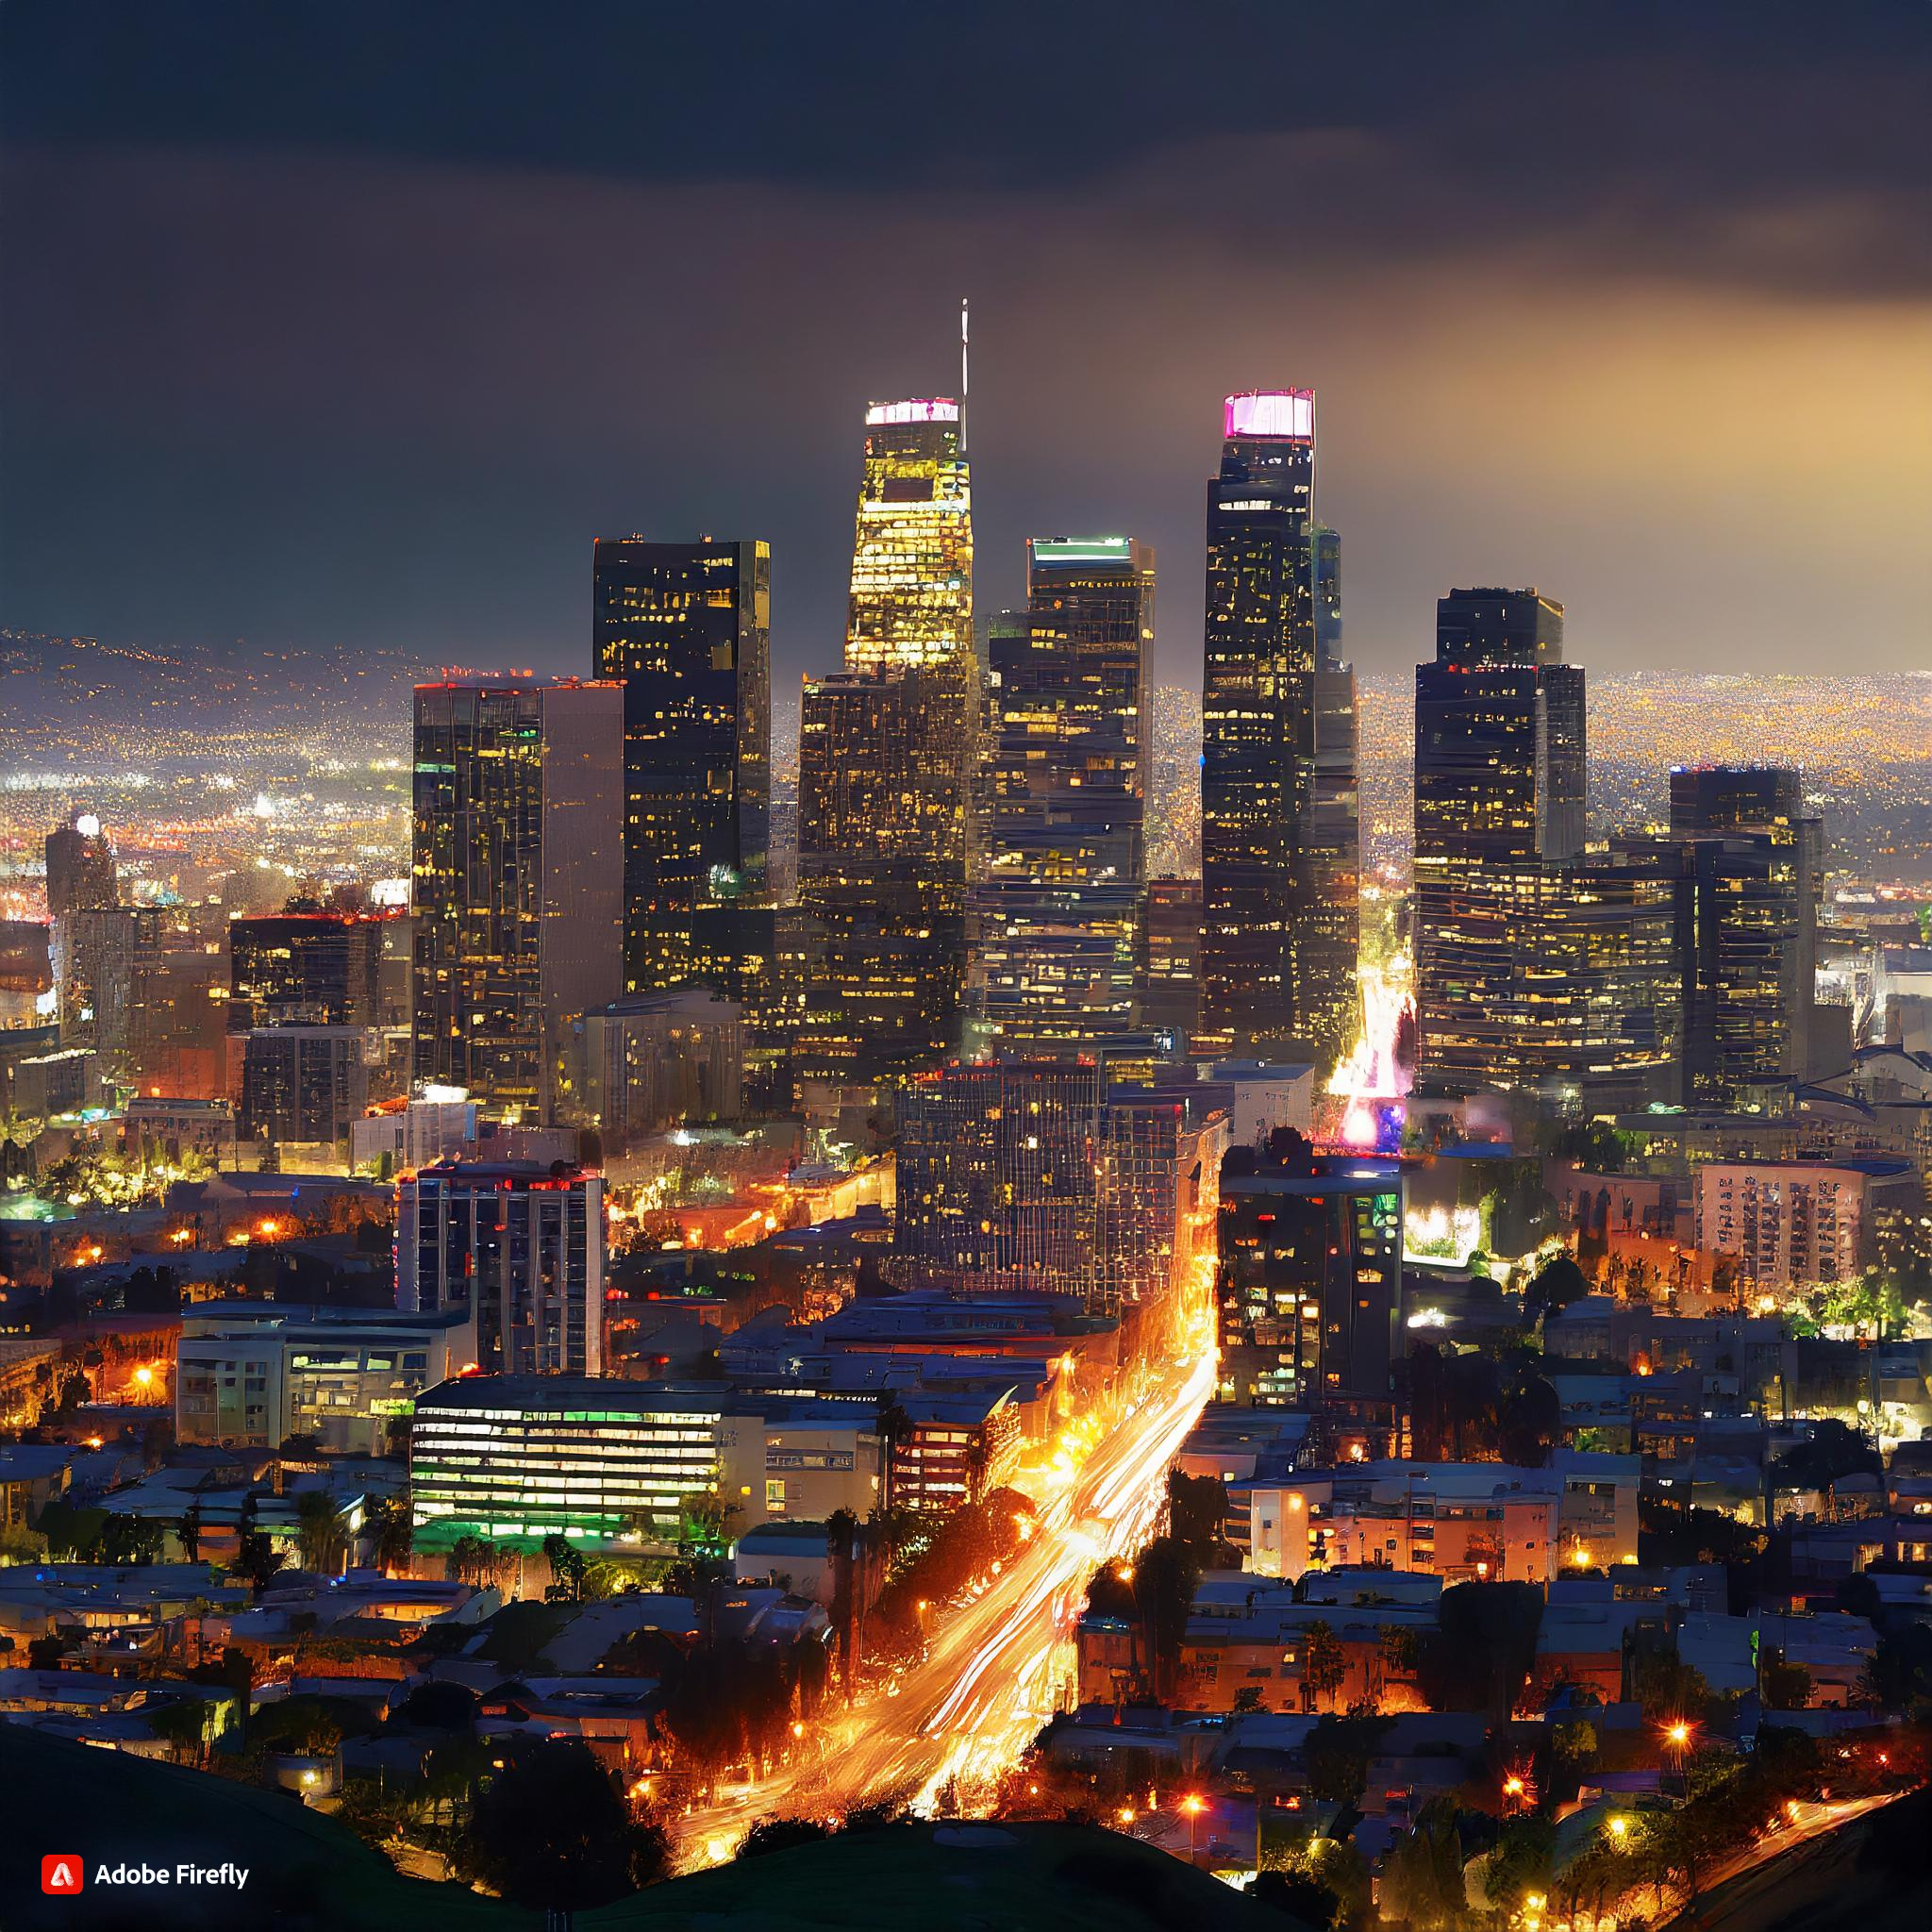  Los Angeles in the night with romantic lighting